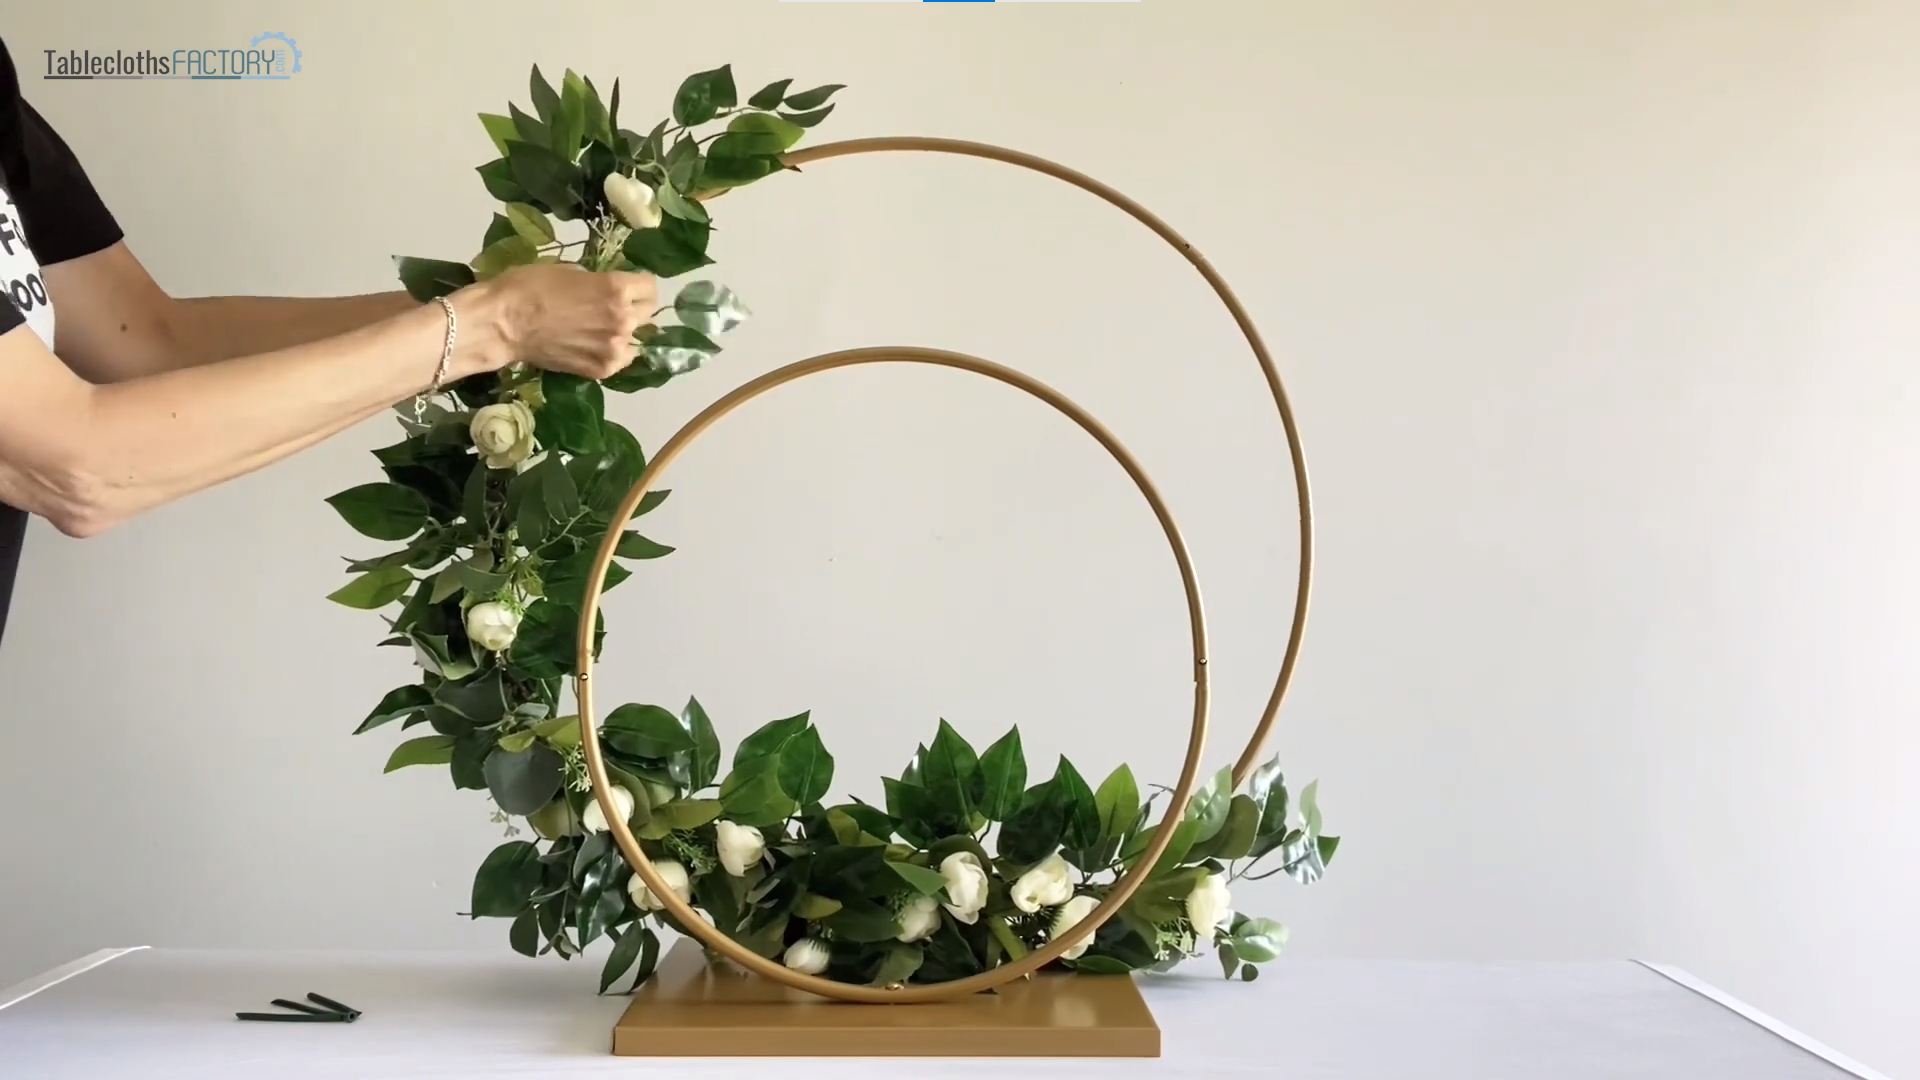 Person attaching a greenery to the hoop stand